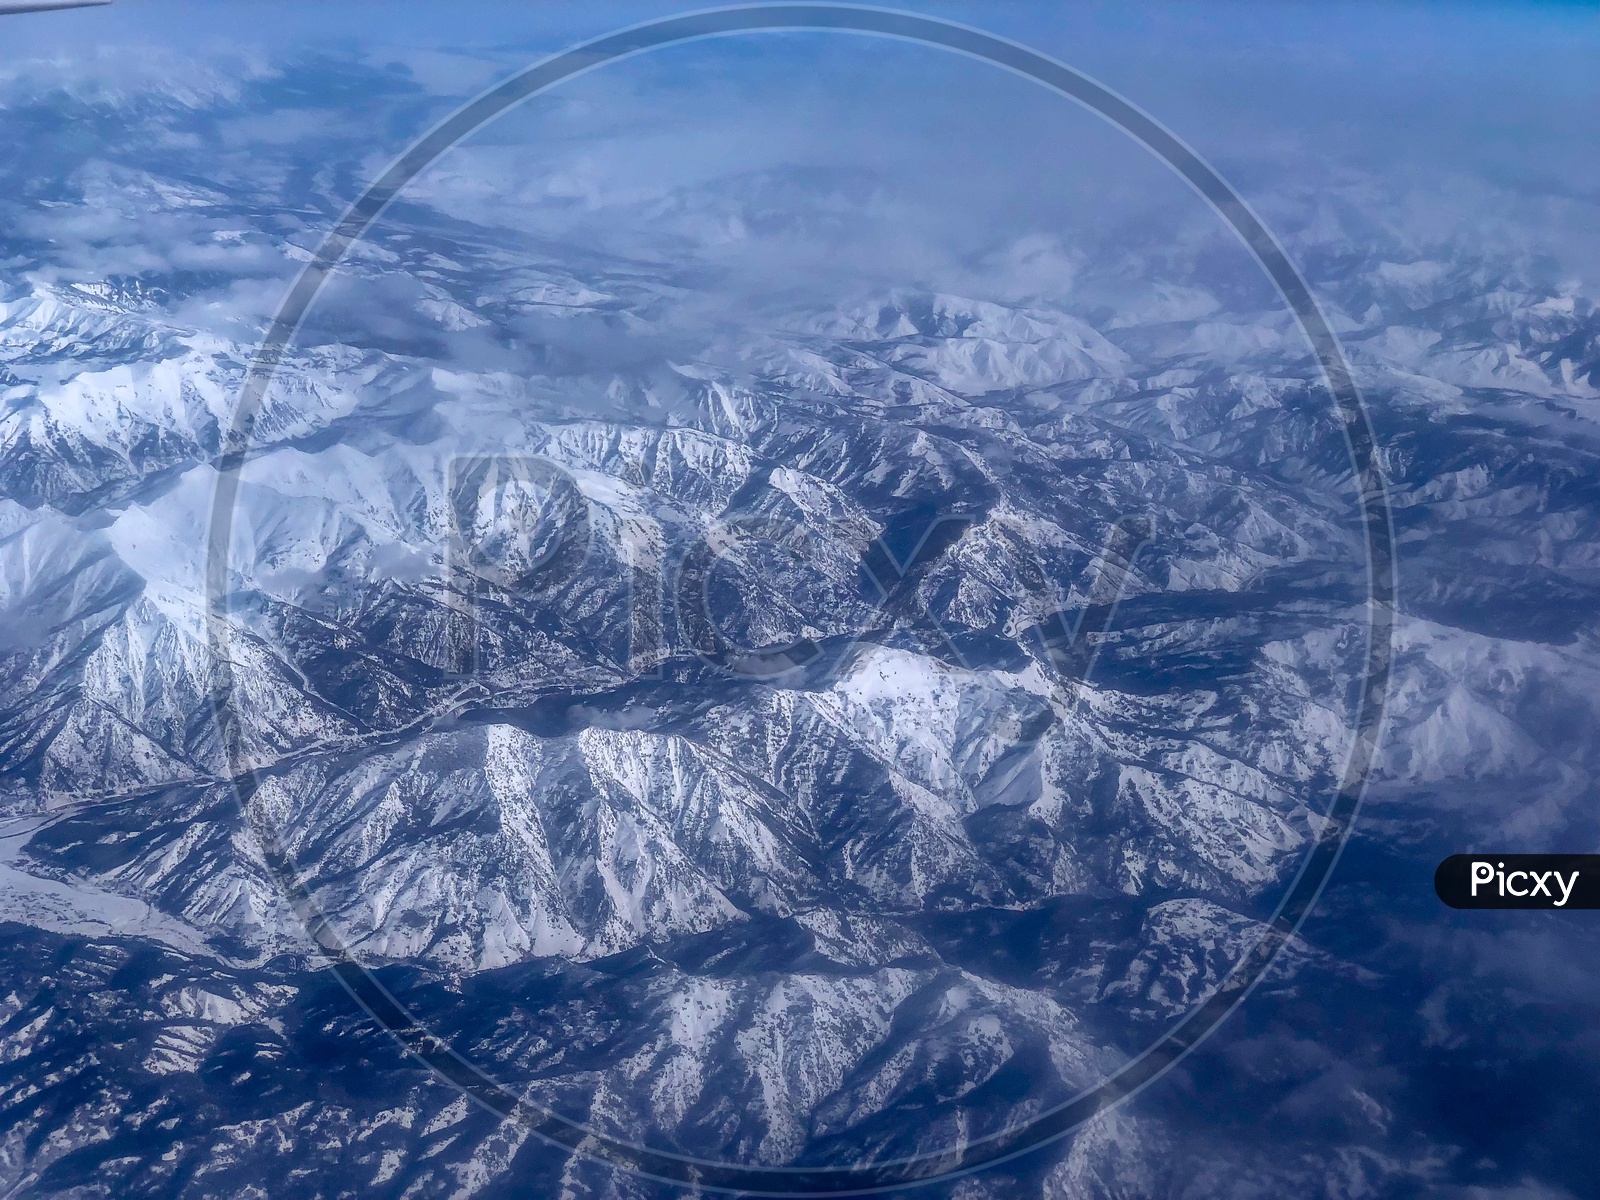 Ariel View of Snow Capped Mountains, Clouds, Blue Sky & Frozen lake